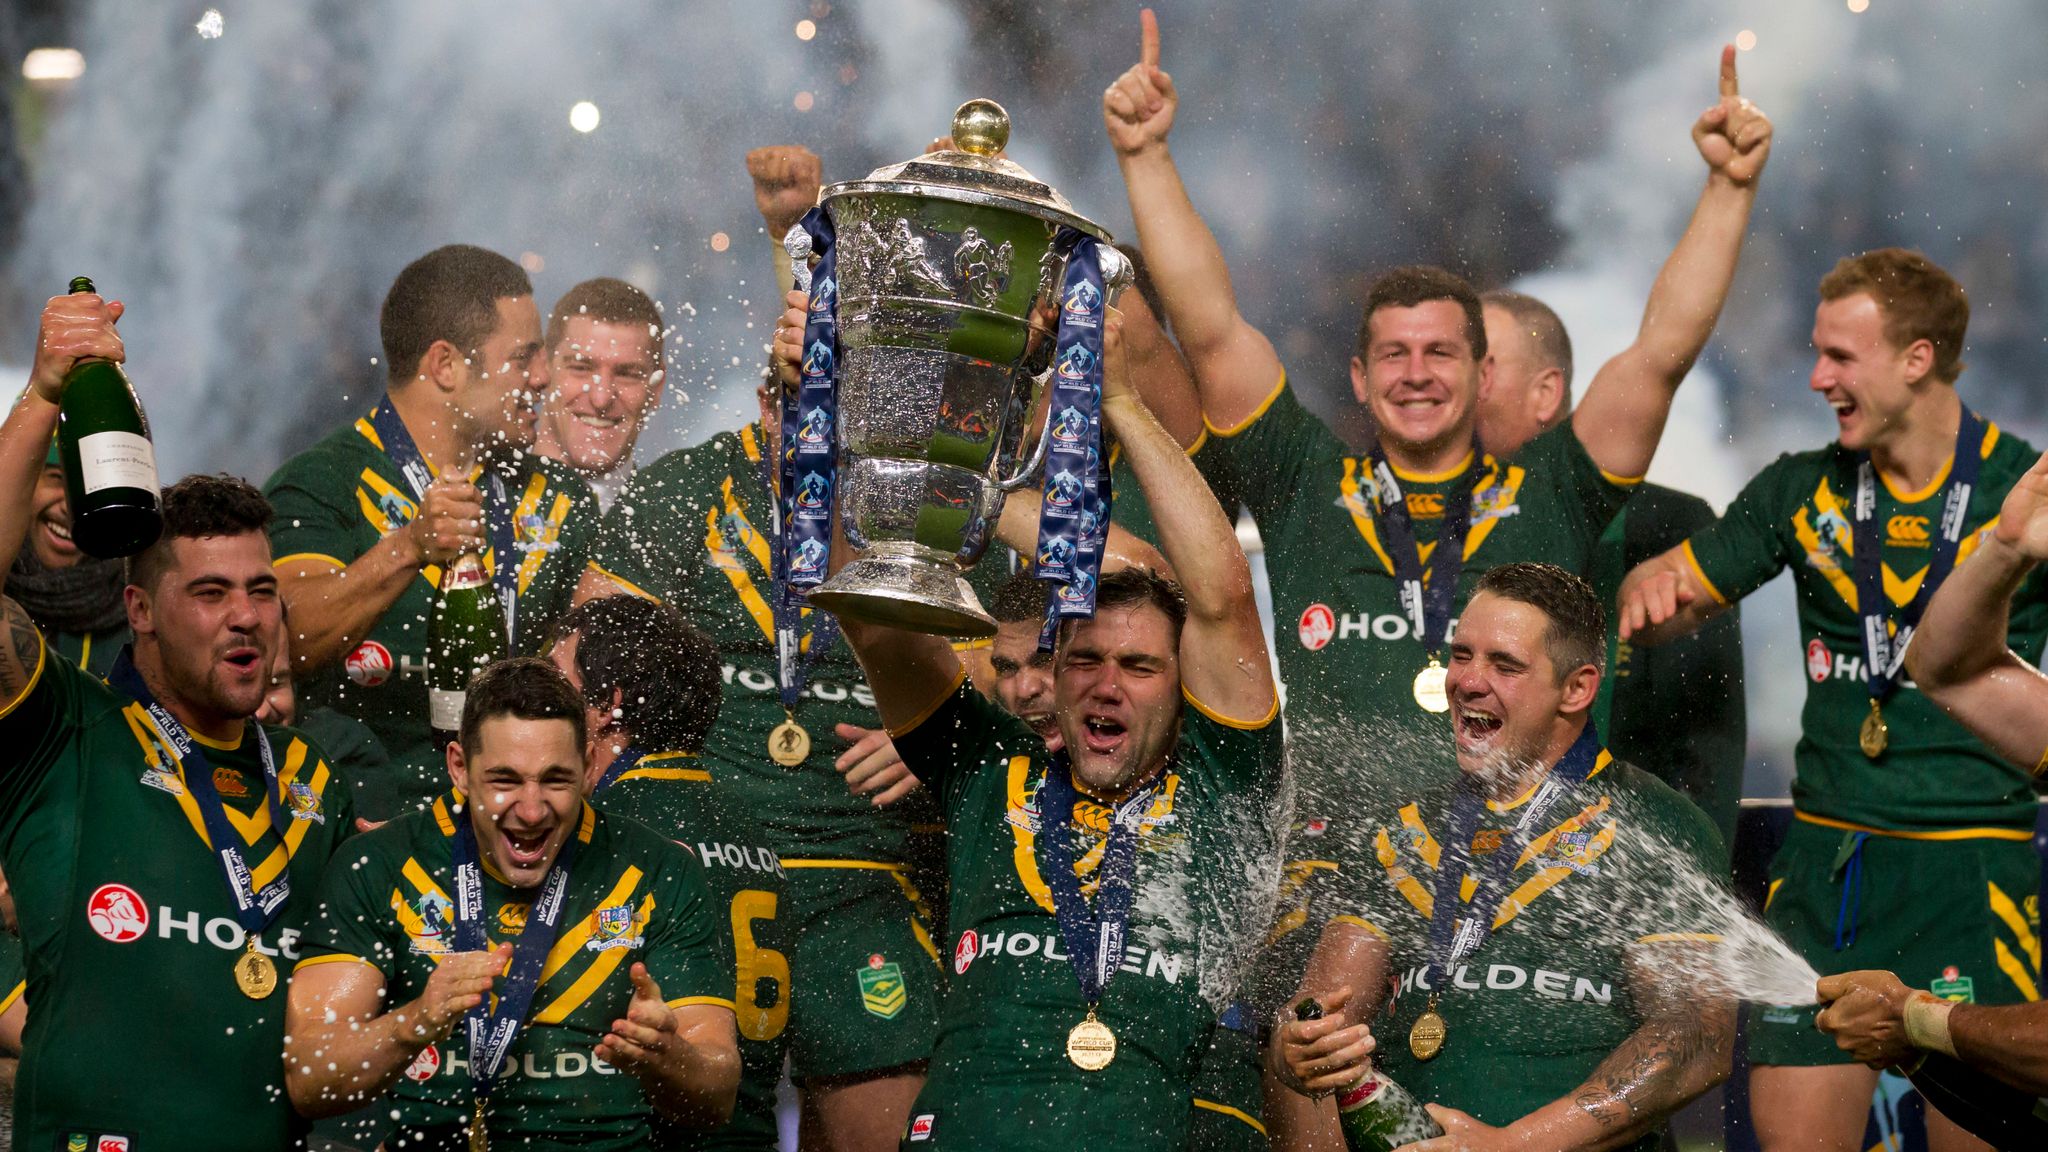 Rugby League World Cup 2021 Fixtures, kick-off times and venues for the mens, womens and wheelchair tournaments in England Rugby League News Sky Sports